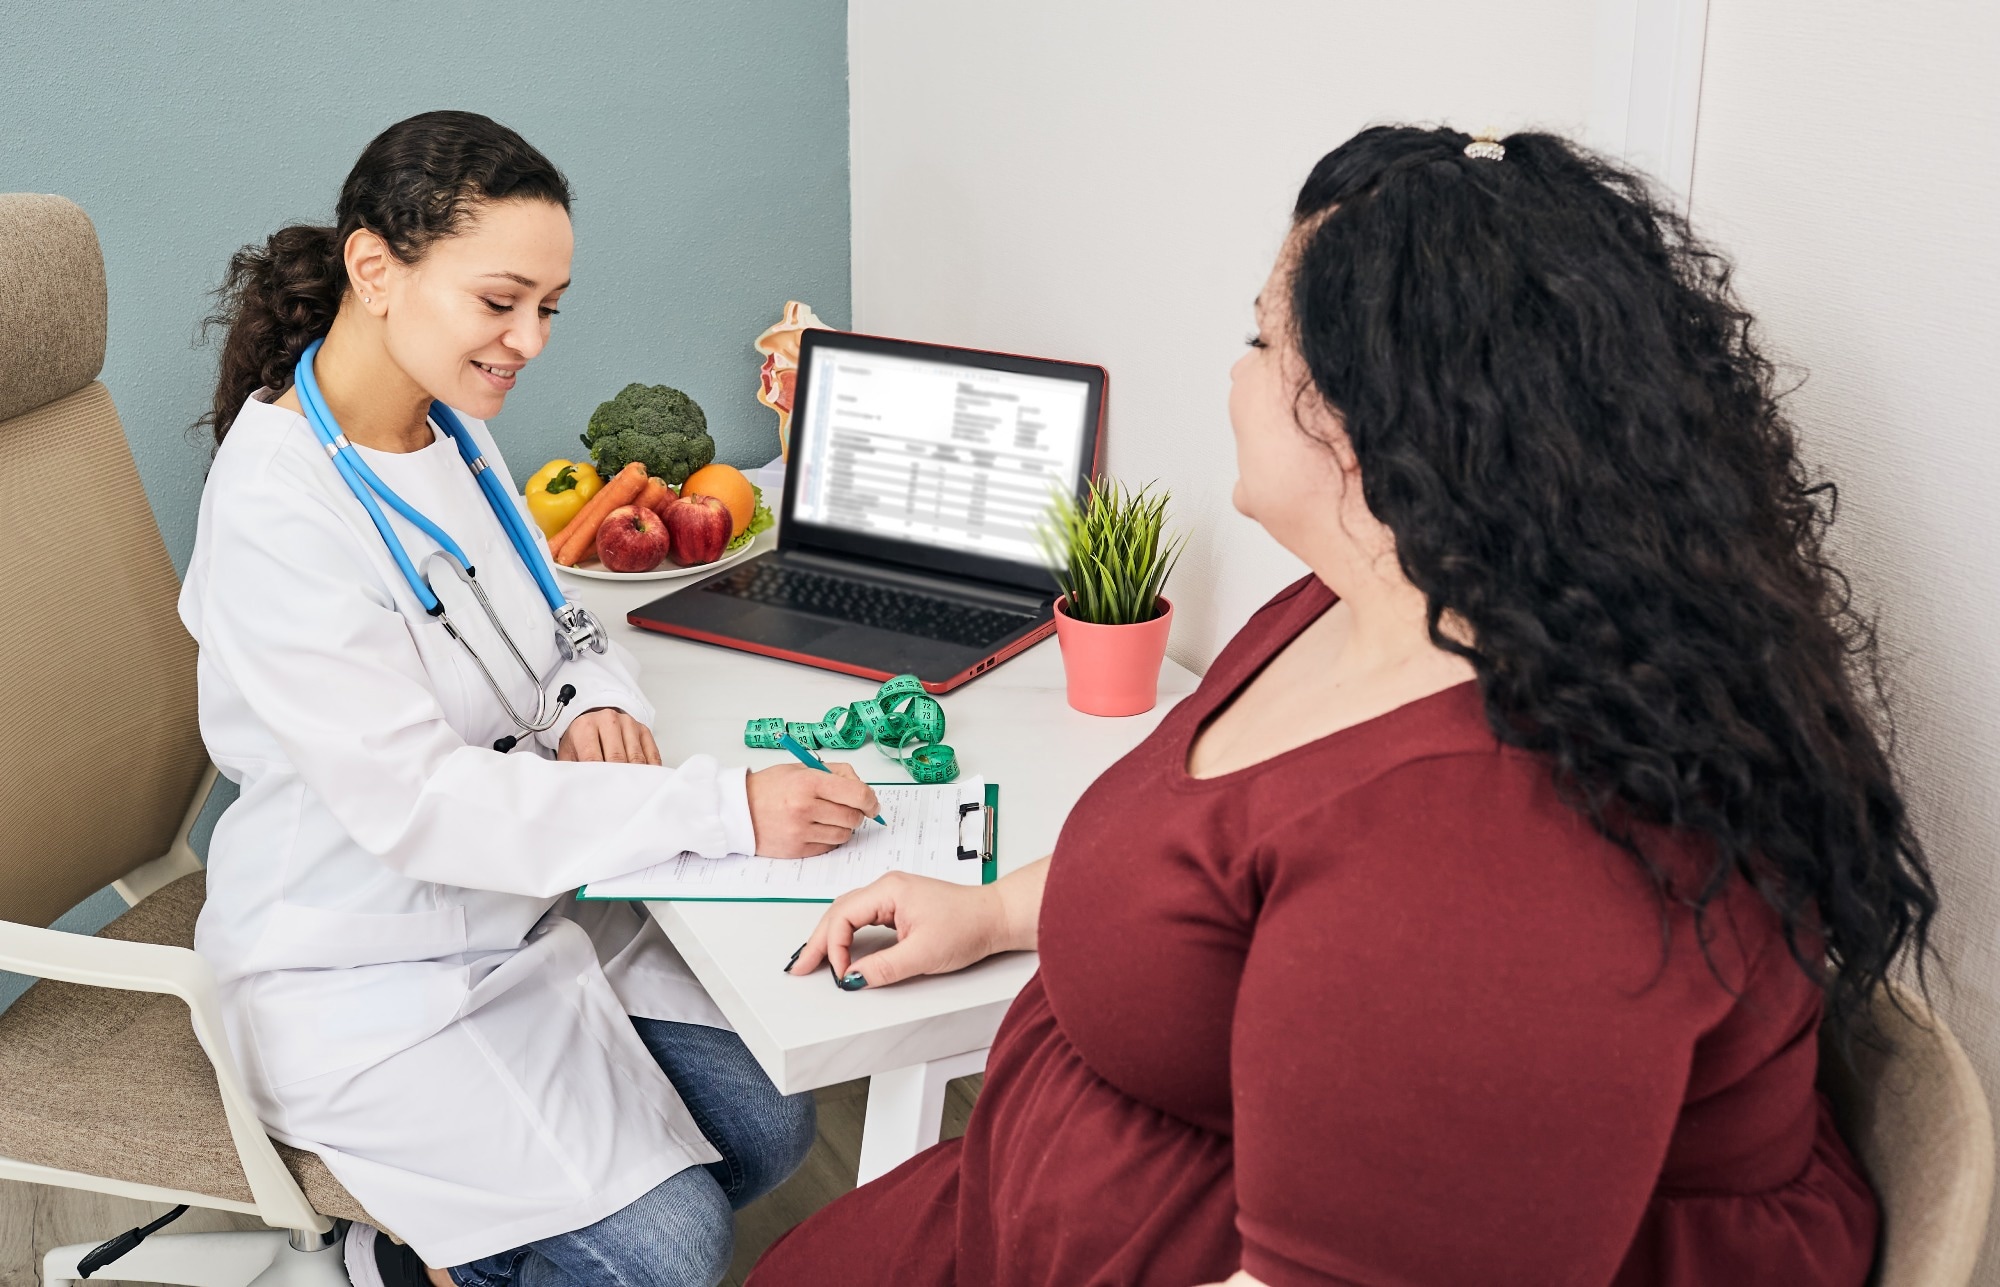 Study: Phenotype tailored lifestyle intervention on weight loss and cardiometabolic risk factors in adults with obesity: a single-centre, non-randomised, proof-of-concept study. Image Credit: Peakstock / Shutterstock.com